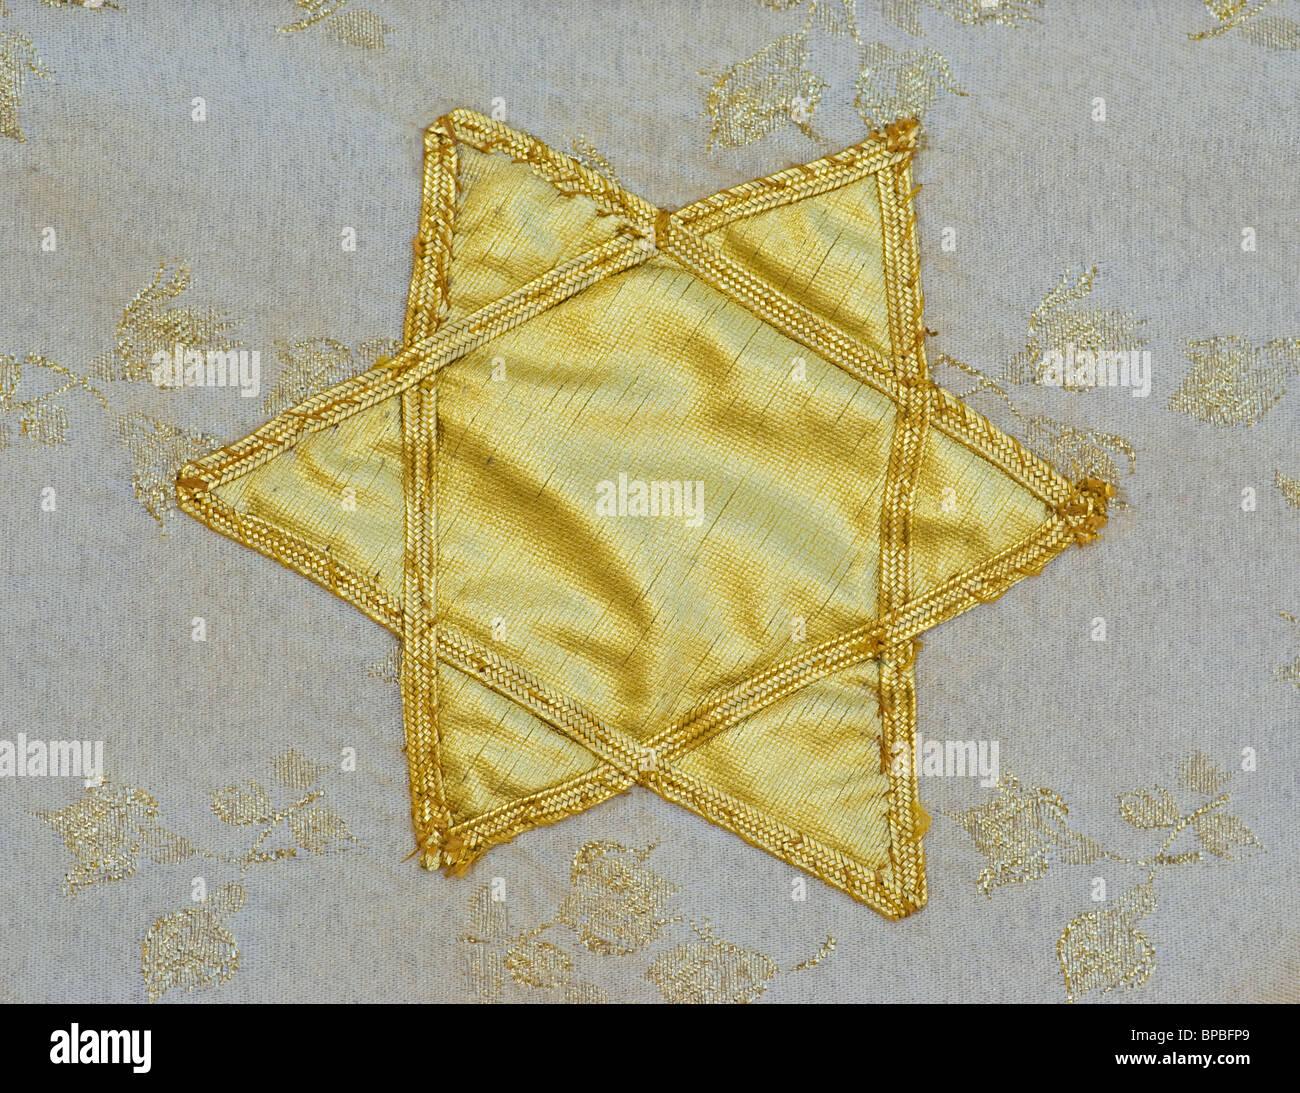 Vintage tapestry with Star of David in gold Stock Photo